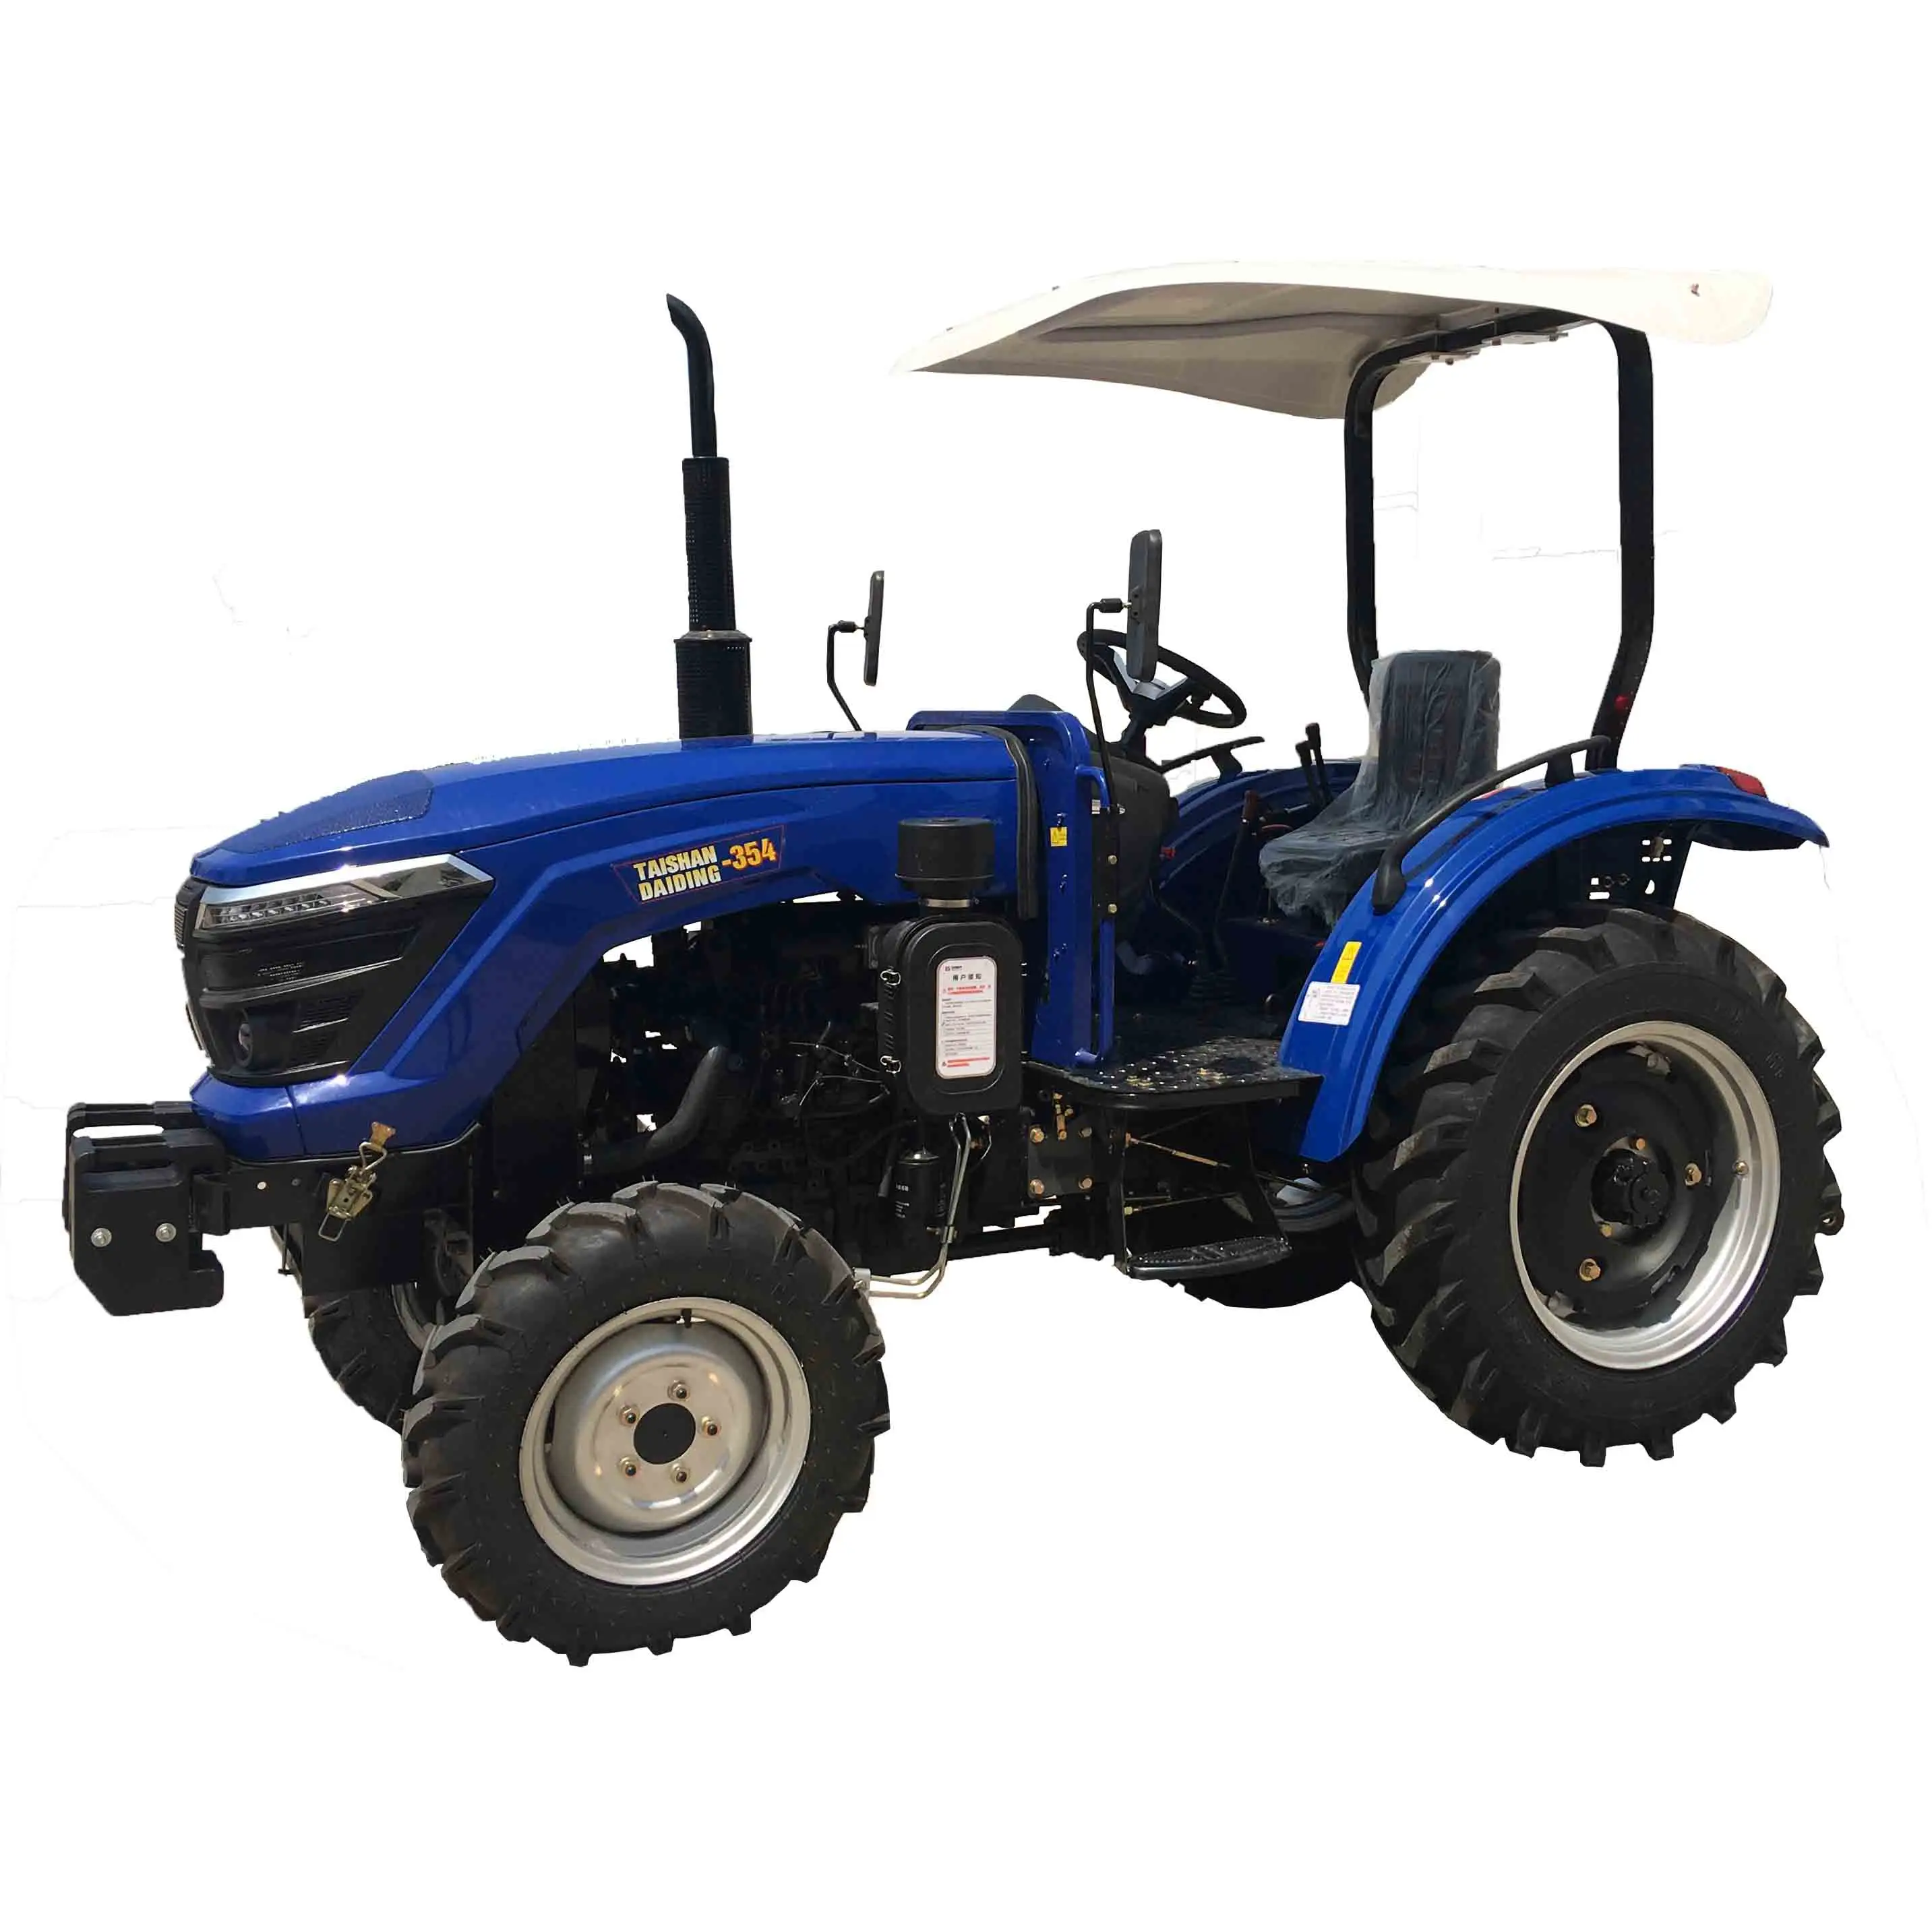 Cheap Price Power Mini 4x4 Agriculture Small 35hp 4wd Farming Machine Tractor